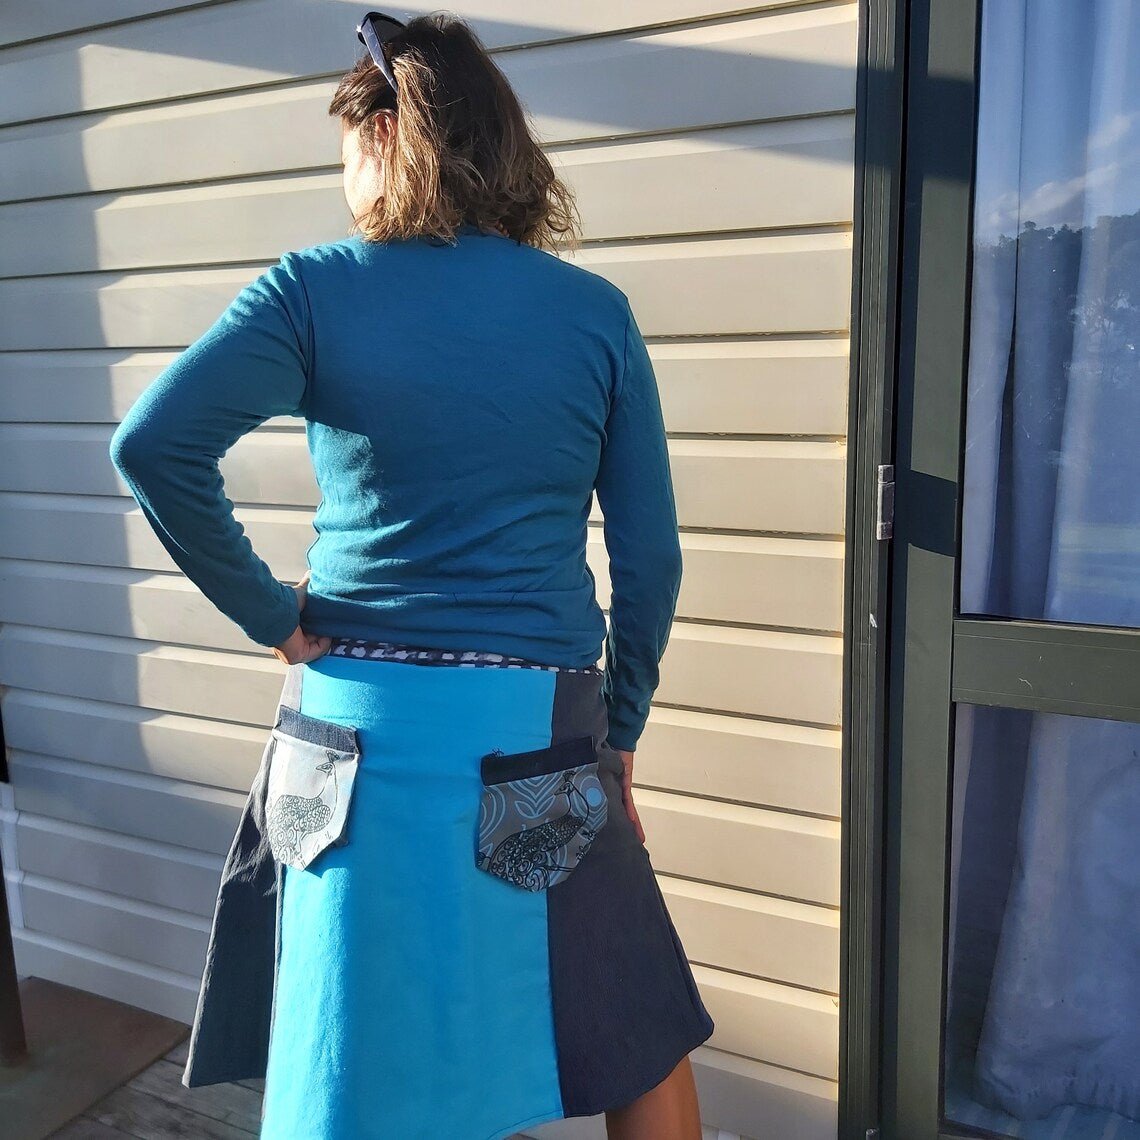 Denim and tourquise Skirt With Peacock print - Heke design